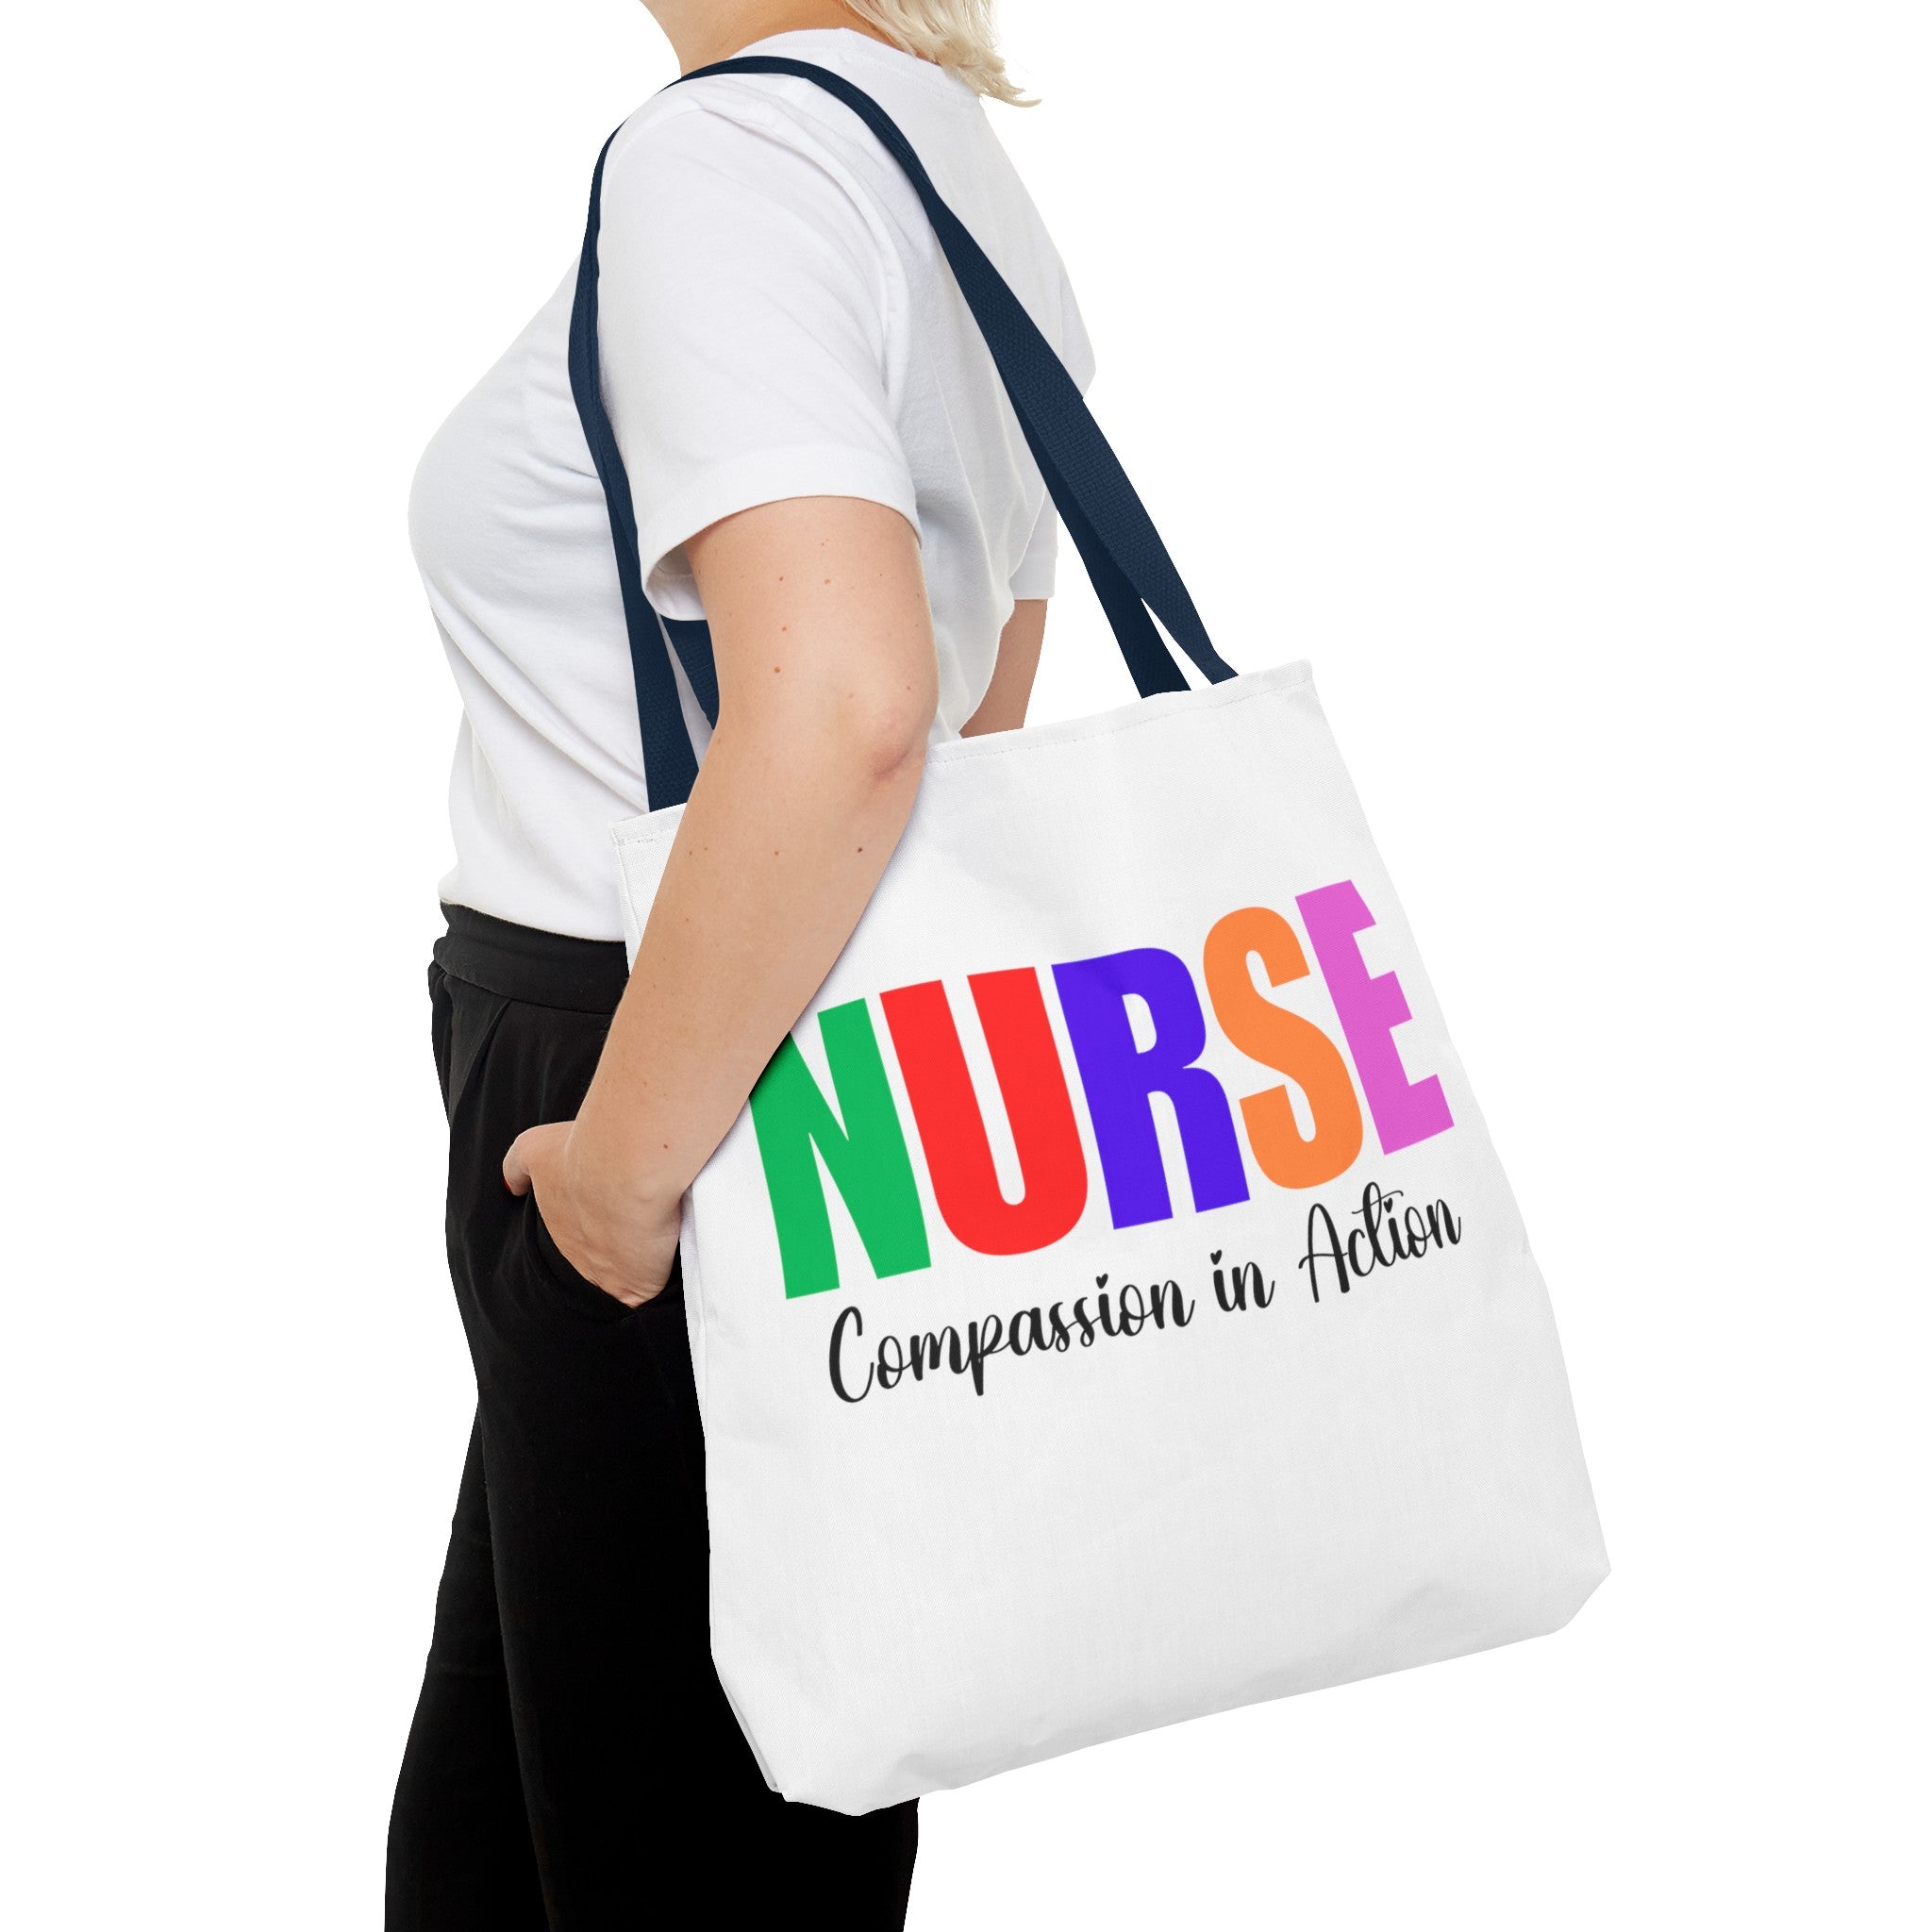 Nurse Compassion In Action Tote Bag (AOP), Gift for Nurse, Nurse Bag, Bag for Nurse